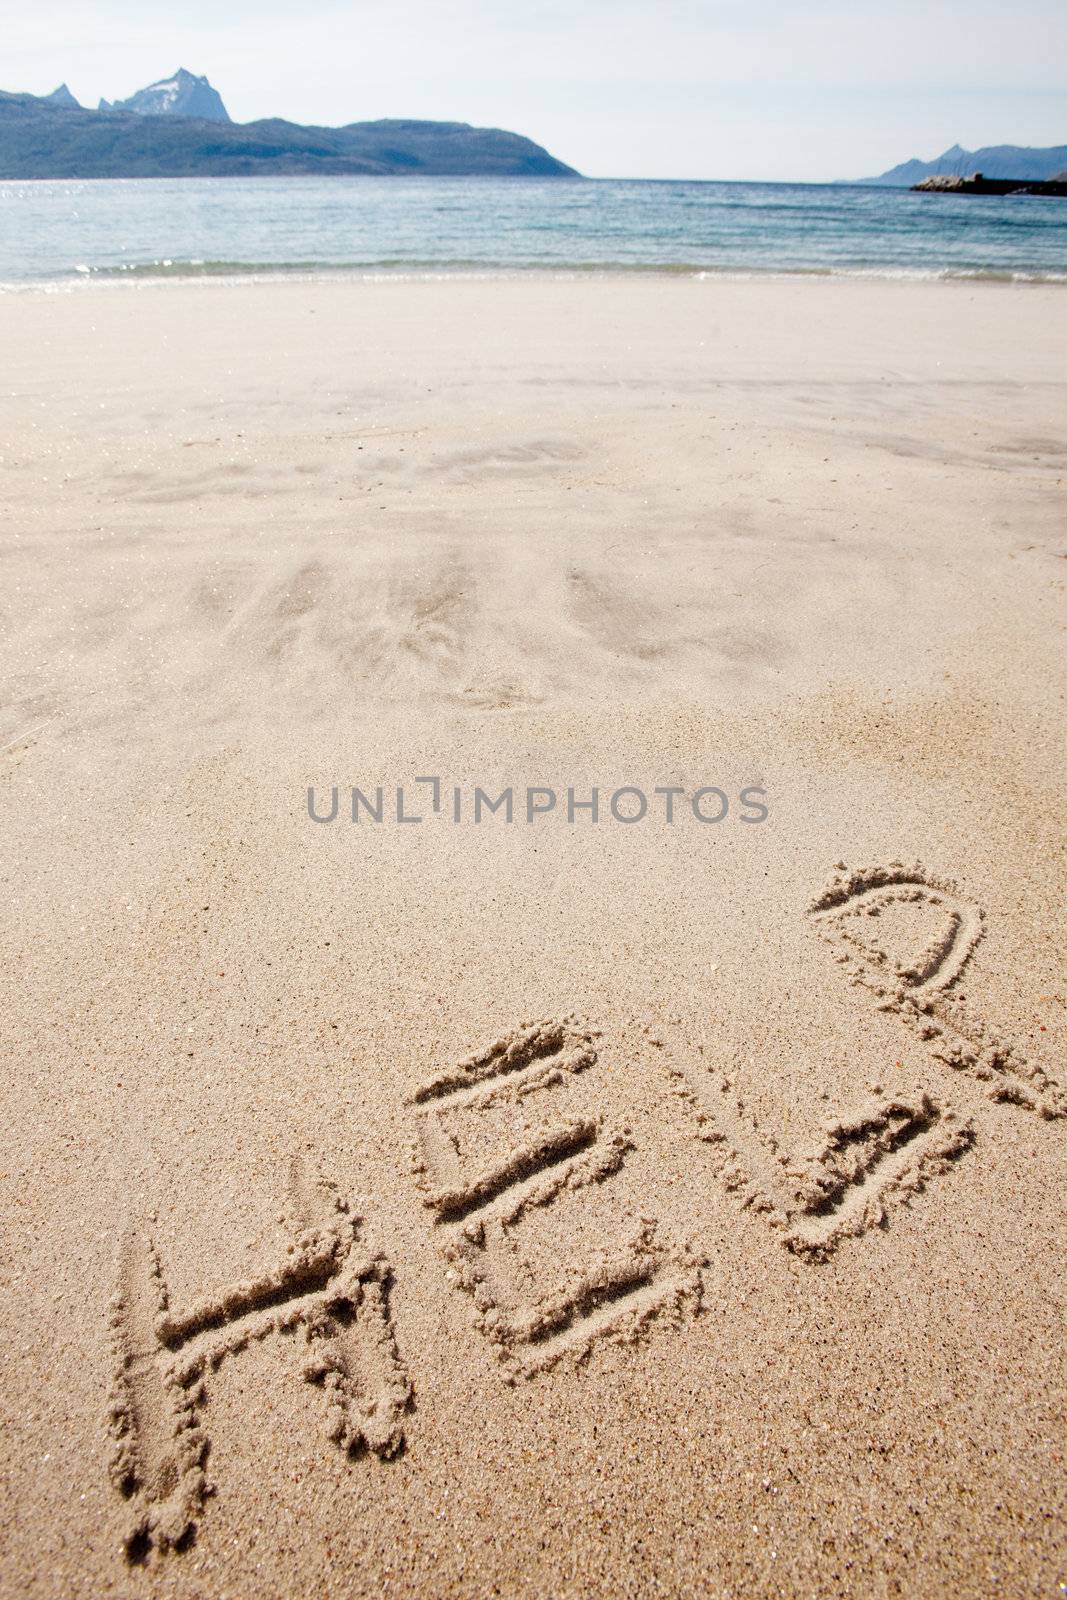 Help written in the sand on a deserted island